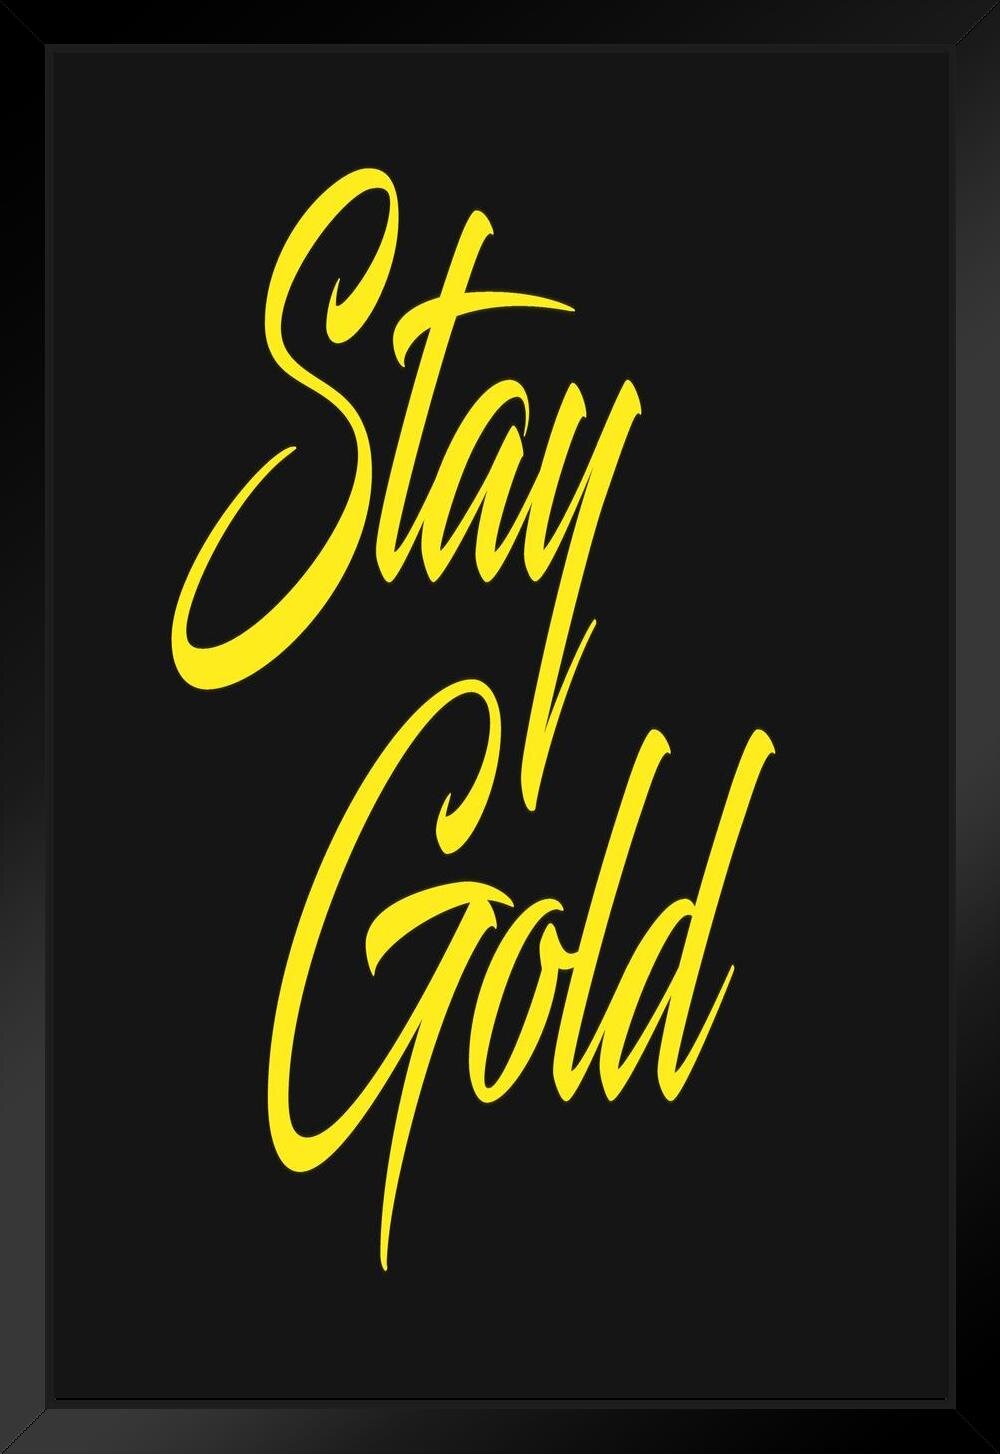 Trinx Stay Gold Famous Funny Motivational Quote Inspirational Teamwork  Inspire Quotation Gratitude Positivity Support Motivate Good Vibes Social  Work Black Wood Framed Art Poster 14X20 - Picture Frame Print | Wayfair